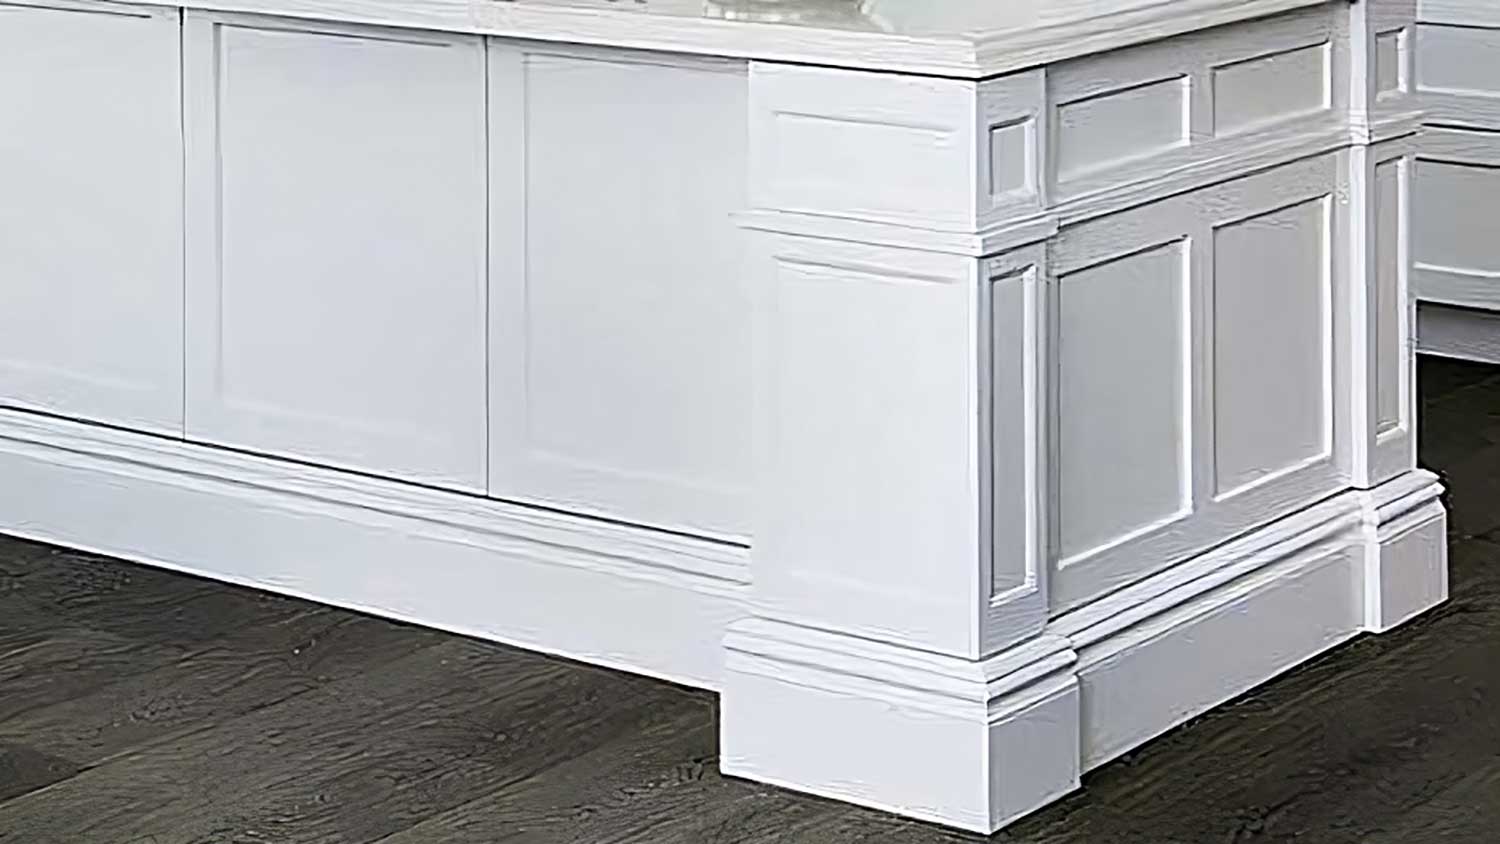 The island bench should include decorative corners and detailed mouldings for more authenticity.